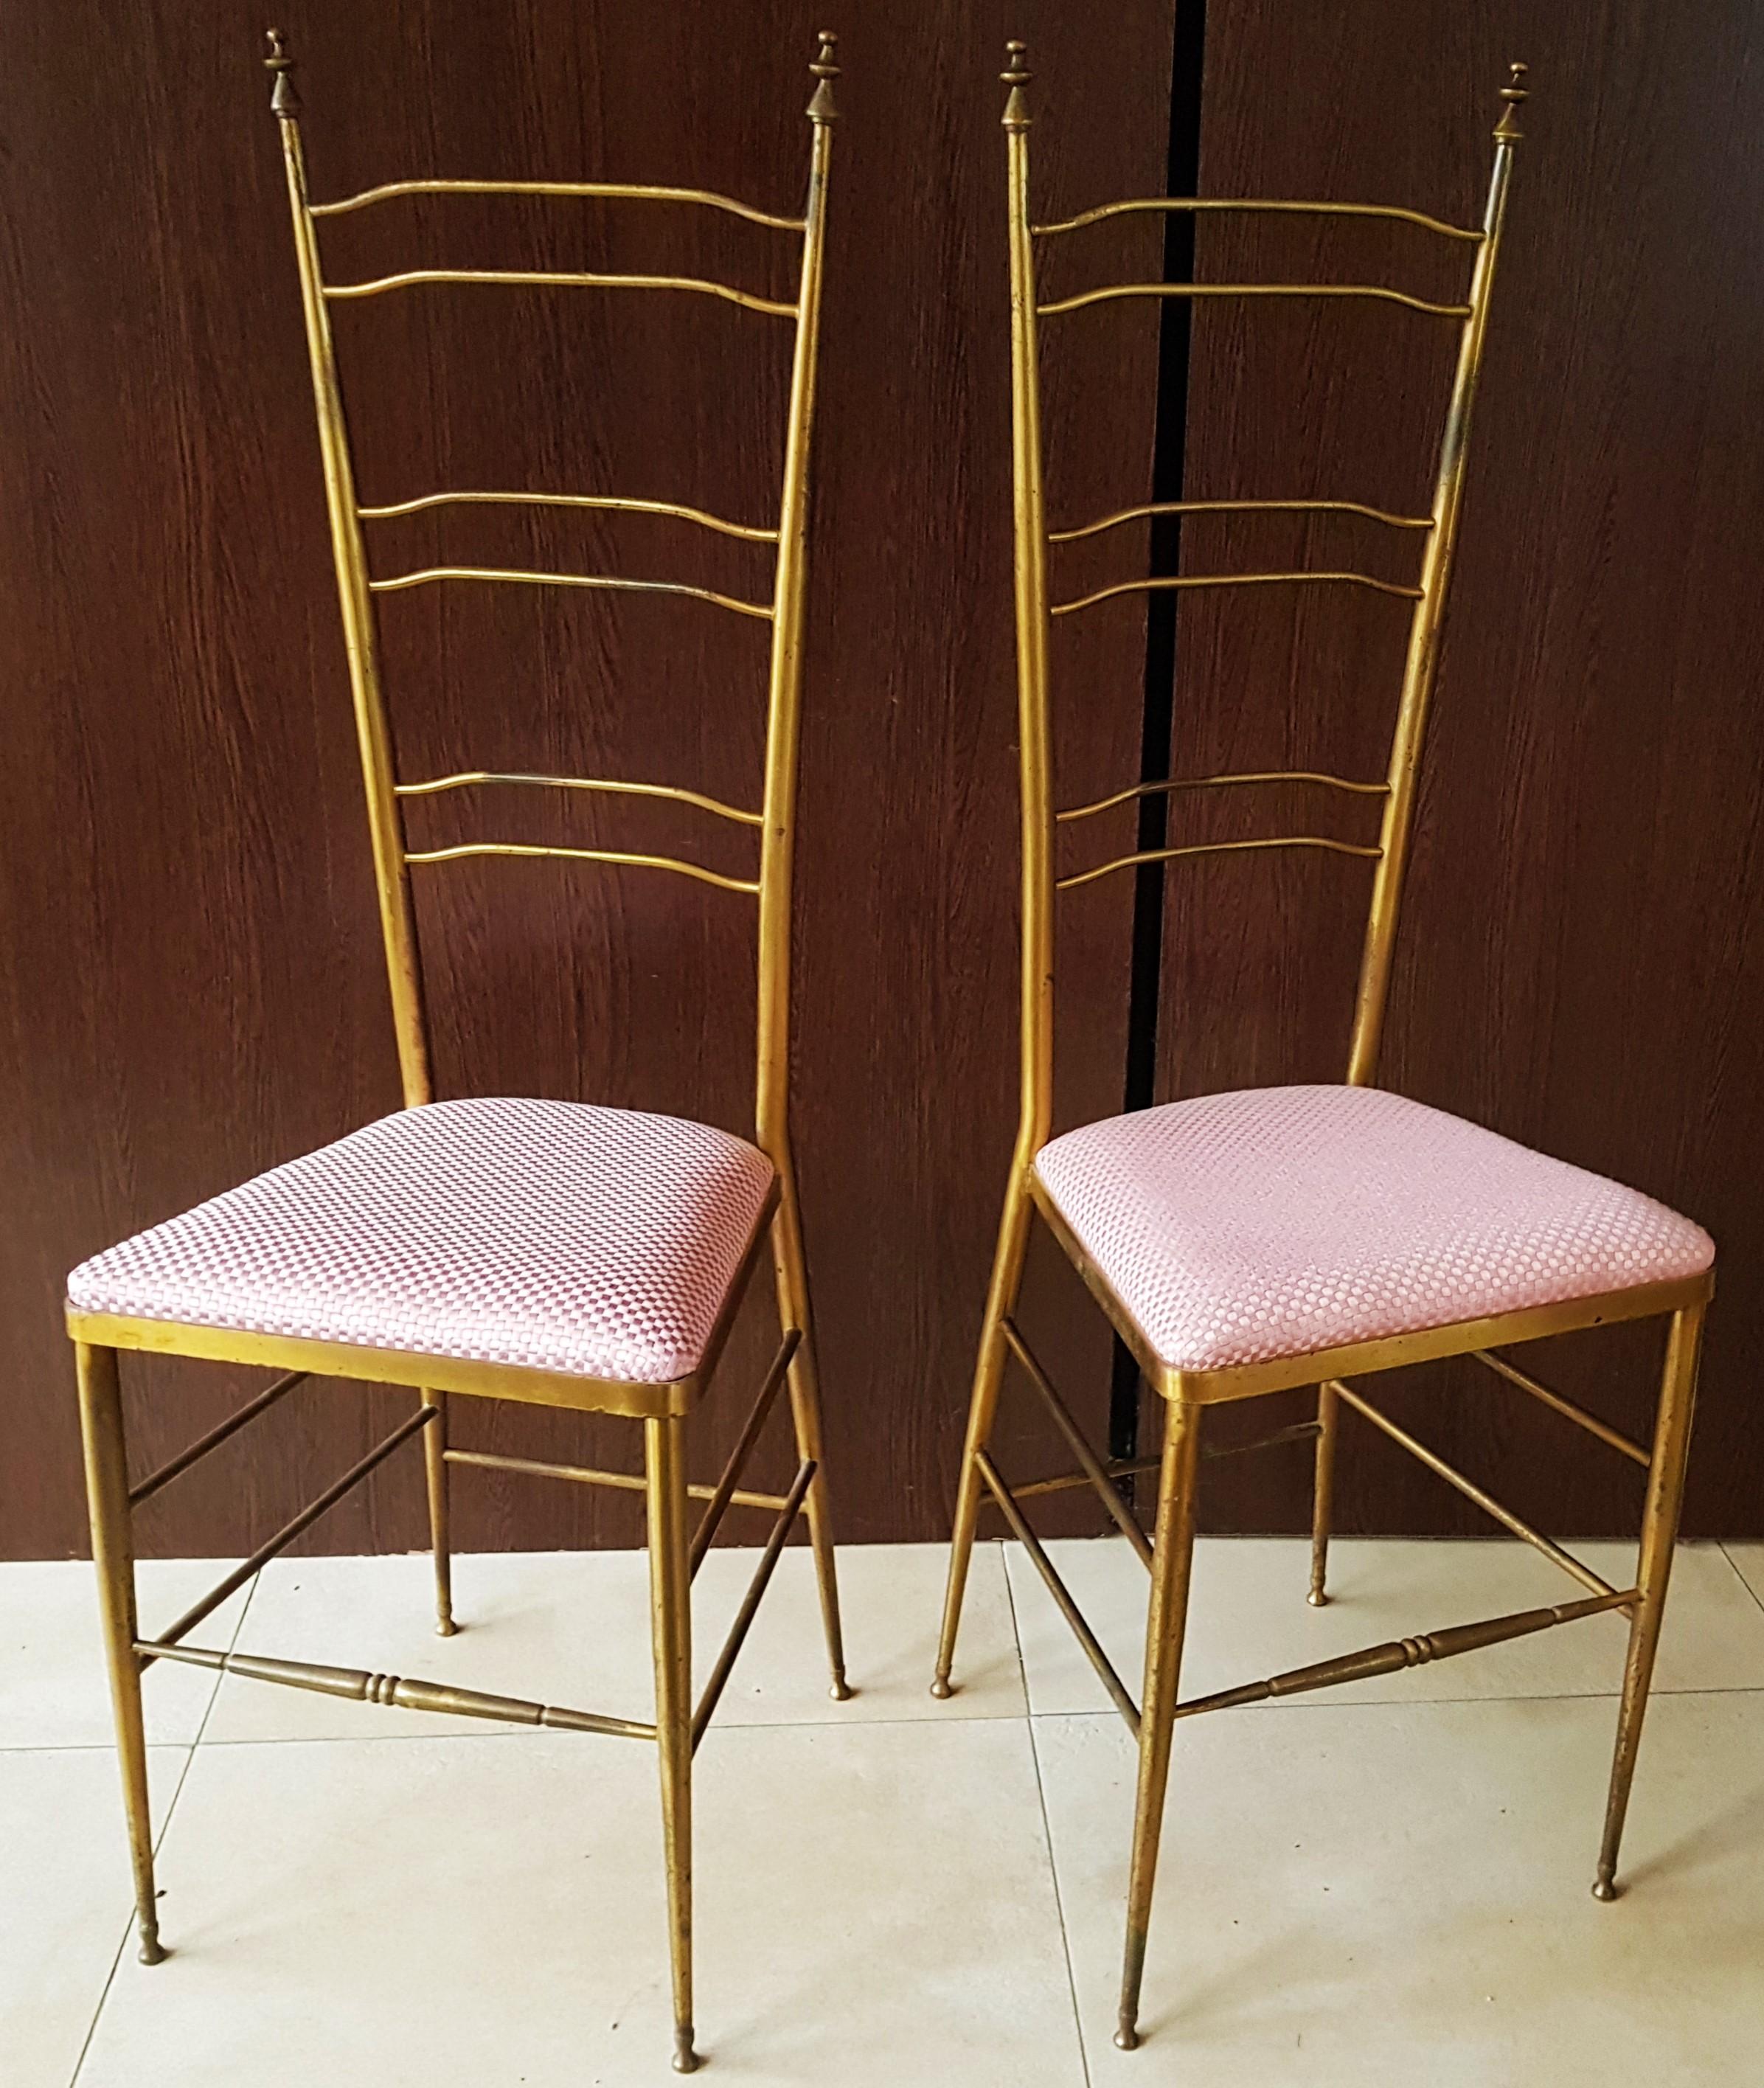 Midcentury Chiavari high back chairs, Italy, 1950s.

Brass with original patina. New upholstered with dusky pink colored fabric.

Free shipping anywhere in the world!